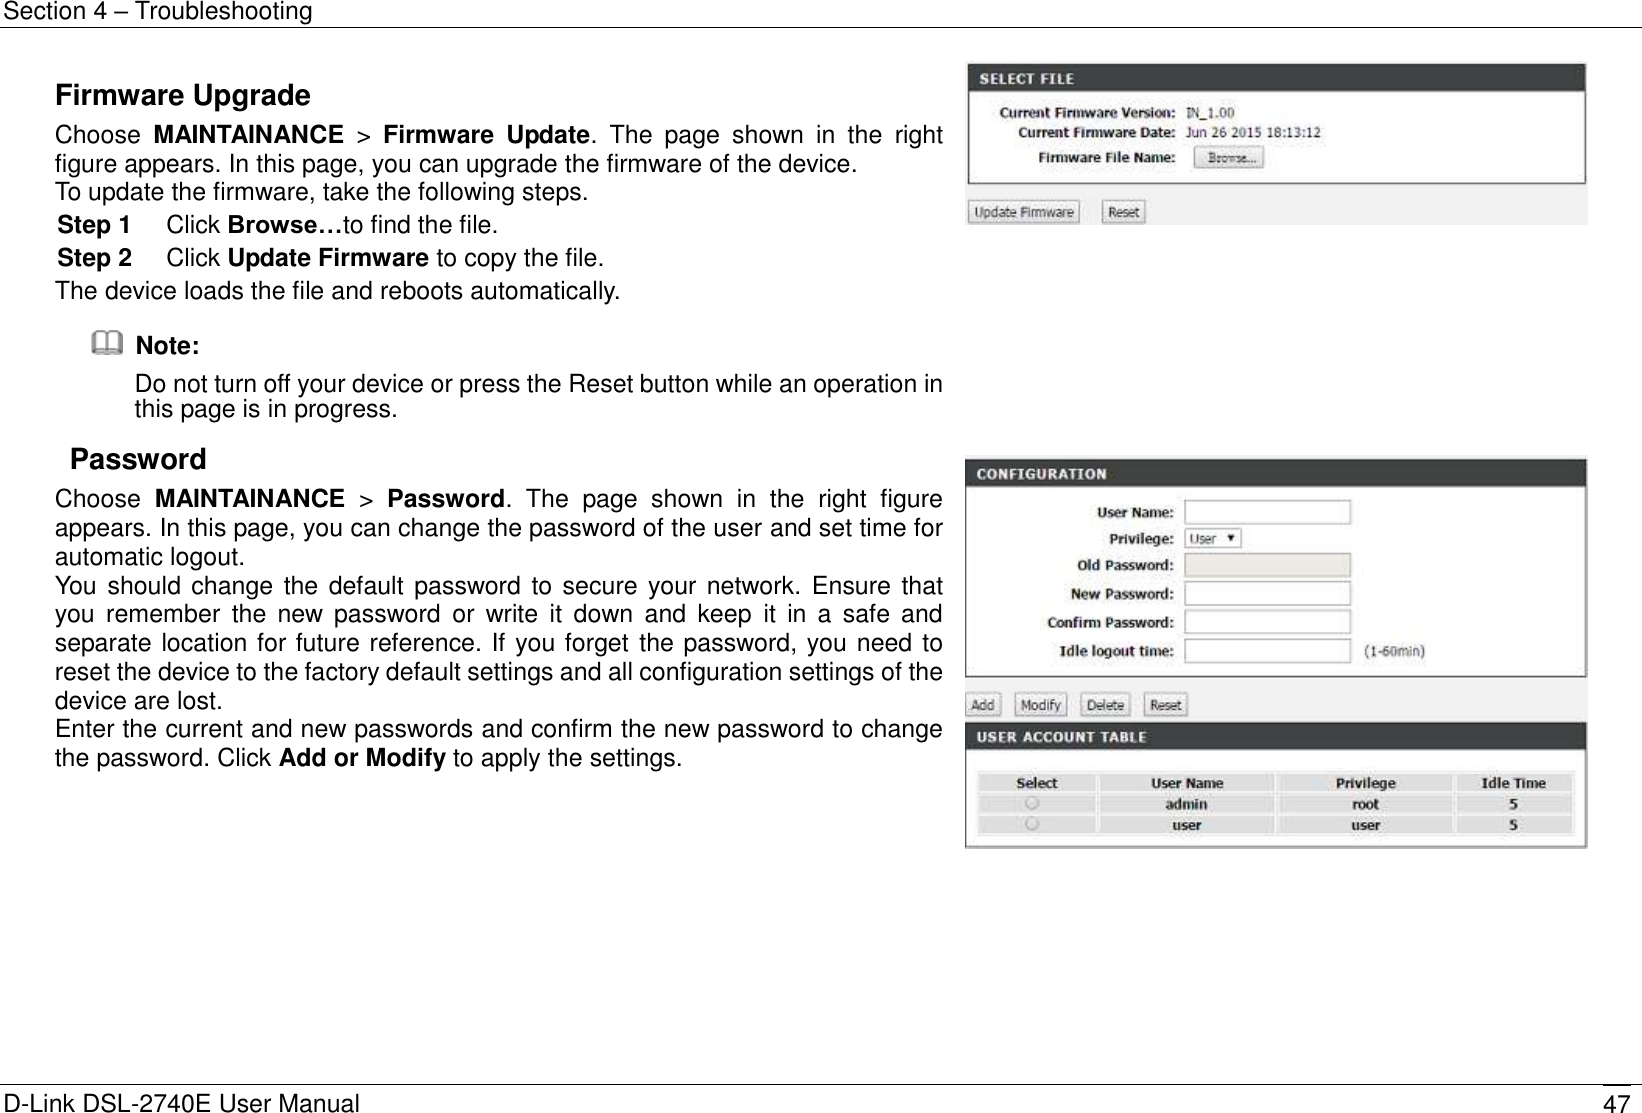 Section 4 – Troubleshooting D-Link DSL-2740E User Manual 47 Firmware Upgrade Choose  MAINTAINANCE  &gt;  Firmware  Update.  The  page  shown  in  the  right figure appears. In this page, you can upgrade the firmware of the device. To update the firmware, take the following steps. Step 1  Click Browse…to find the file. Step 2  Click Update Firmware to copy the file. The device loads the file and reboots automatically.   Note: Do not turn off your device or press the Reset button while an operation in this page is in progress.    Password Choose  MAINTAINANCE  &gt;  Password.  The  page  shown  in  the  right  figure appears. In this page, you can change the password of the user and set time for automatic logout. You should change the default password to secure your network. Ensure that you  remember  the  new password  or  write  it  down  and  keep  it  in  a  safe  and separate location for future reference. If you forget the password, you need to reset the device to the factory default settings and all configuration settings of the device are lost. Enter the current and new passwords and confirm the new password to change the password. Click Add or Modify to apply the settings.           